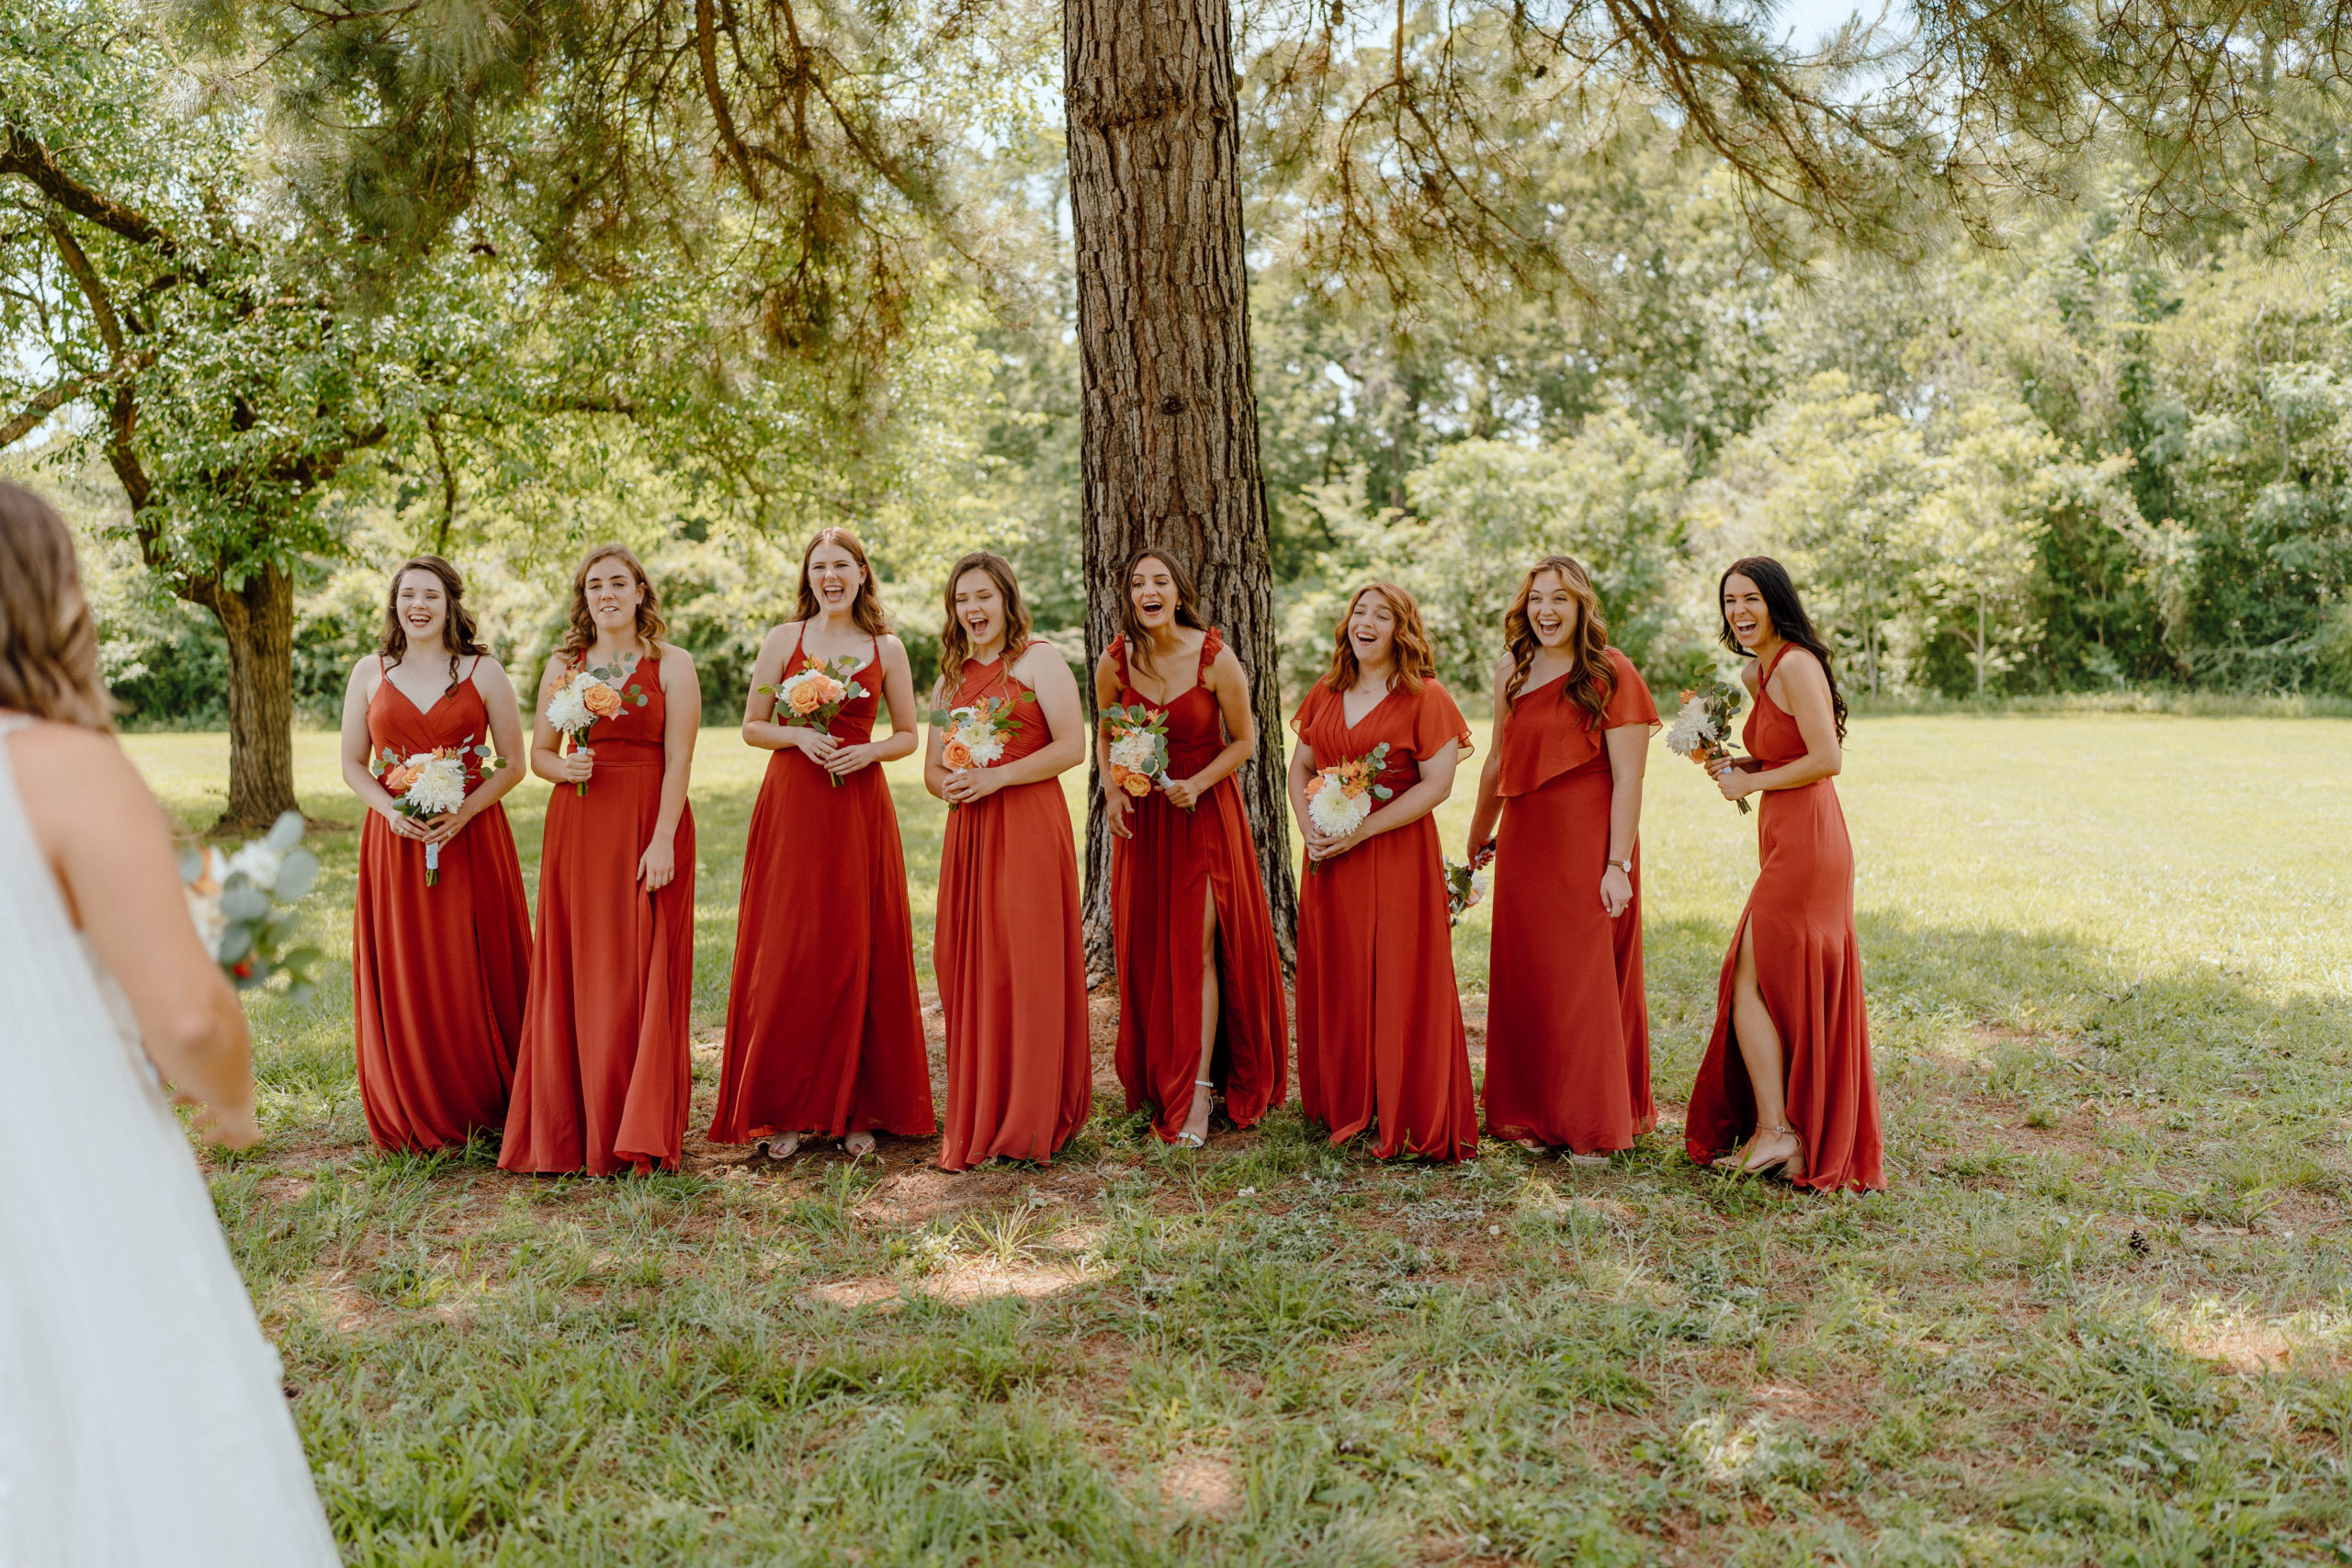 Bridesmaid first looks are among my favorite requests for photos. Their expressions say it all! Each photo is full to the brim with candid storytelling in an editorial style. Angelina Loreta Photography created timeless wedding photos for the Austin couple.